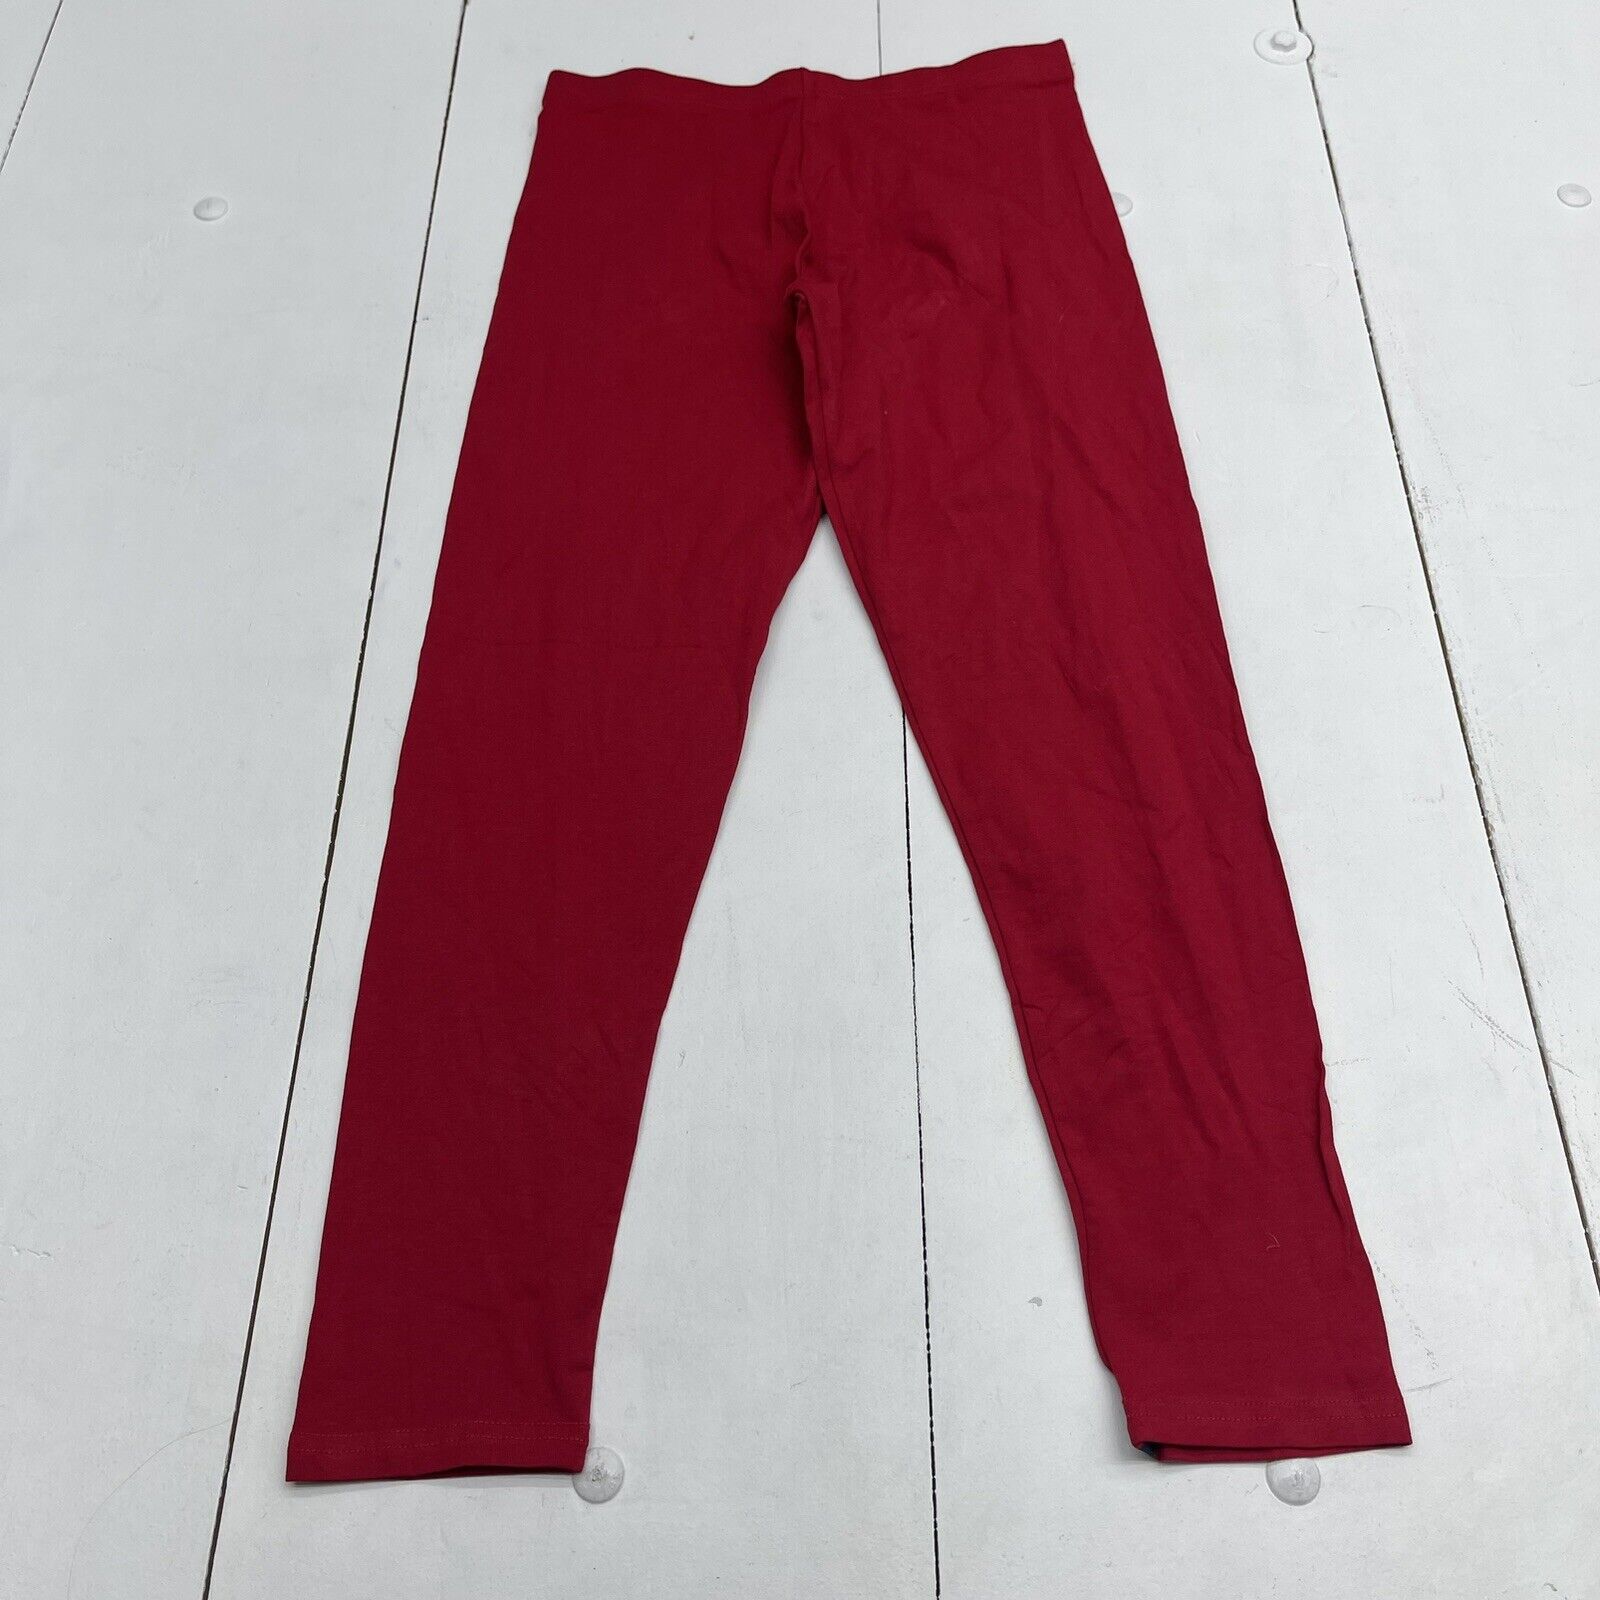 Calzedonia Red Coated Thermal Lined Skinny Leggings Women's Large New -  beyond exchange